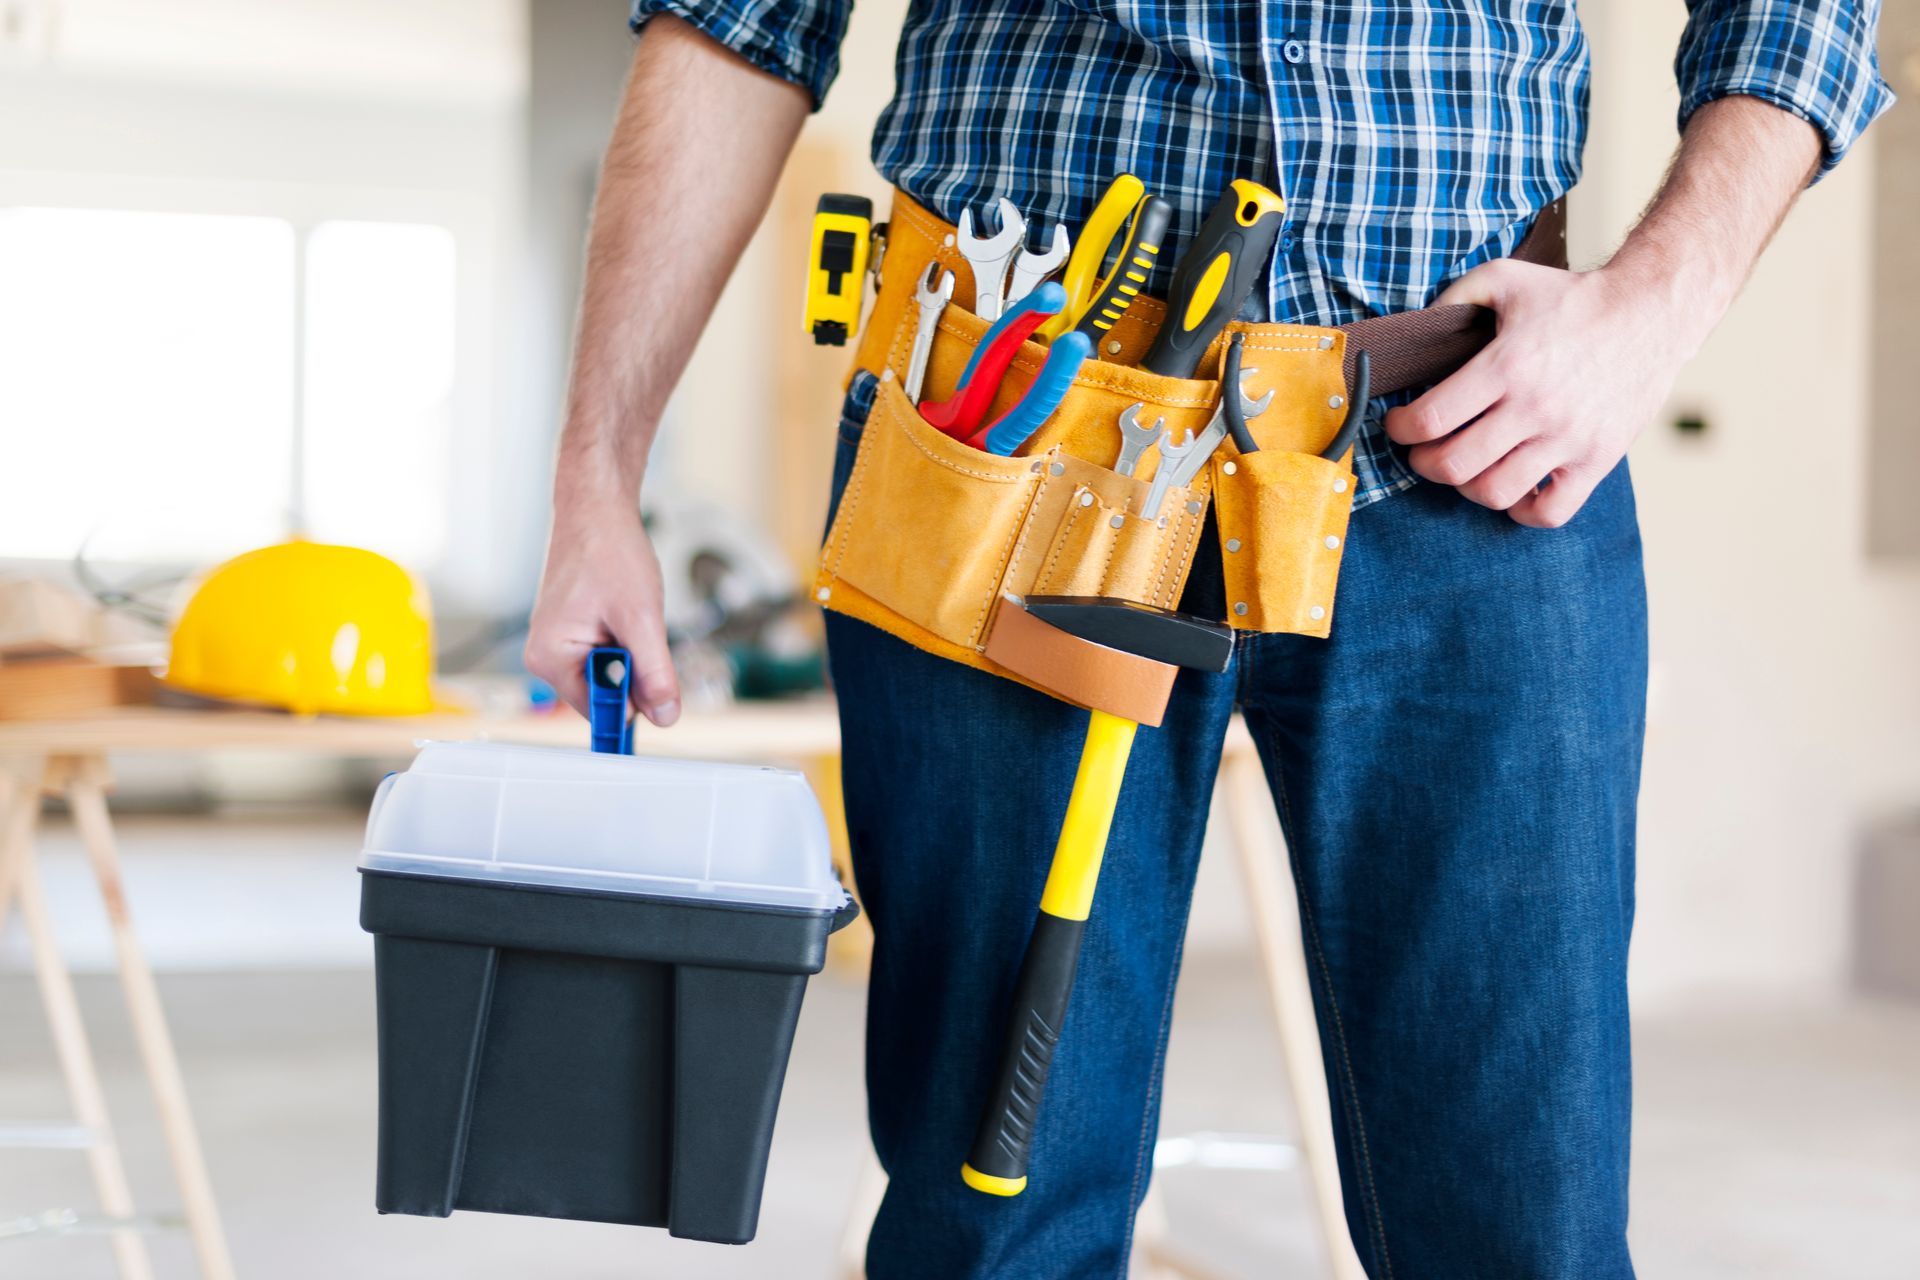 A man is wearing a tool belt and holding a toolbox.